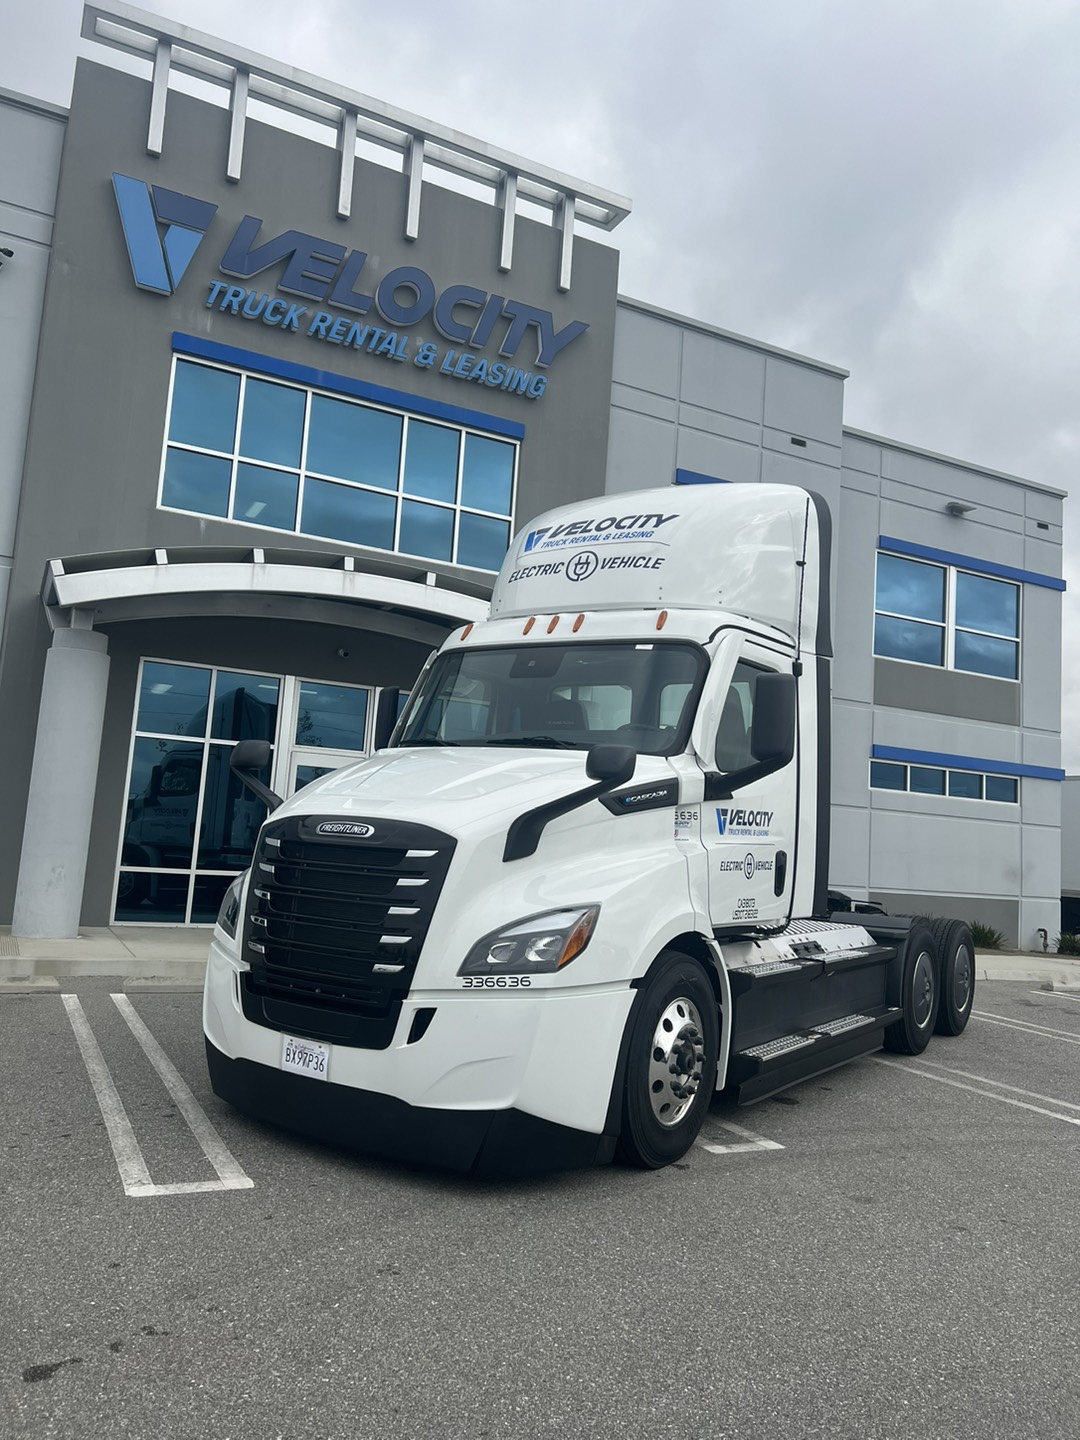 Velocity Vehicle Group Purchases 200 Battery-Electric Trucks for California Truck Rental & Leasing Operations